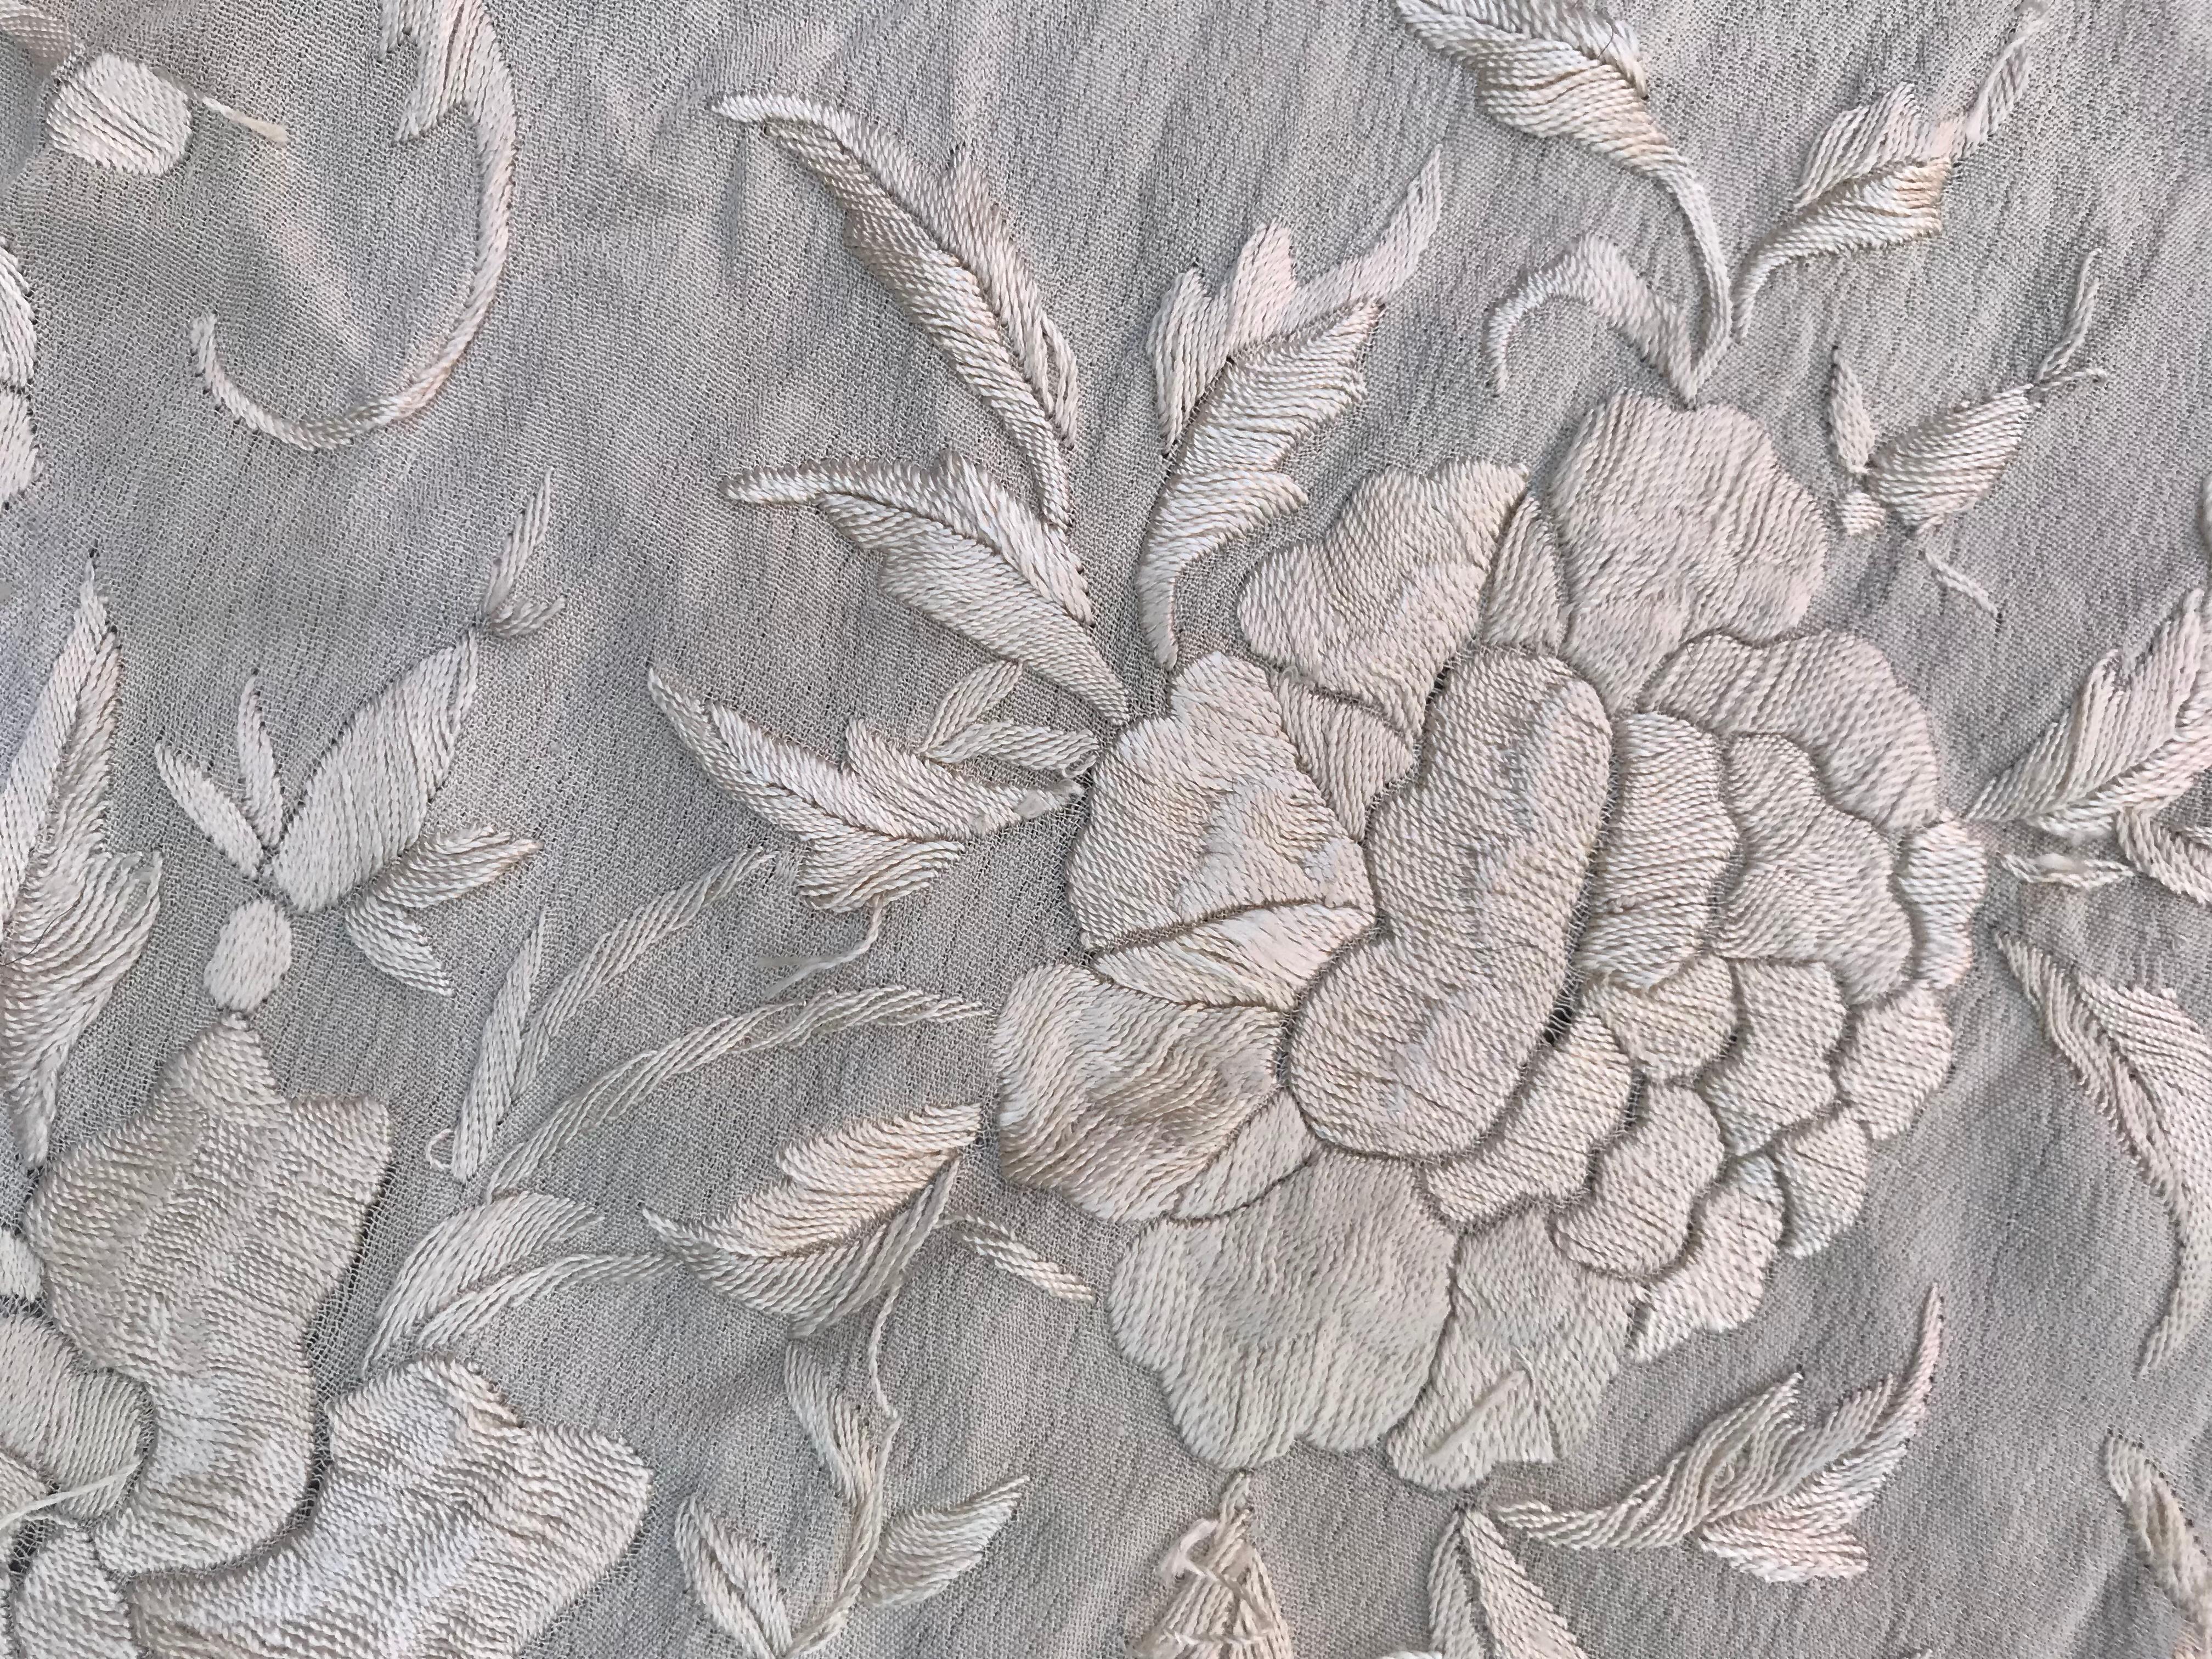 Silk Vintage Manila Shawl, Tablecloth Chinese Embroidery For Sale